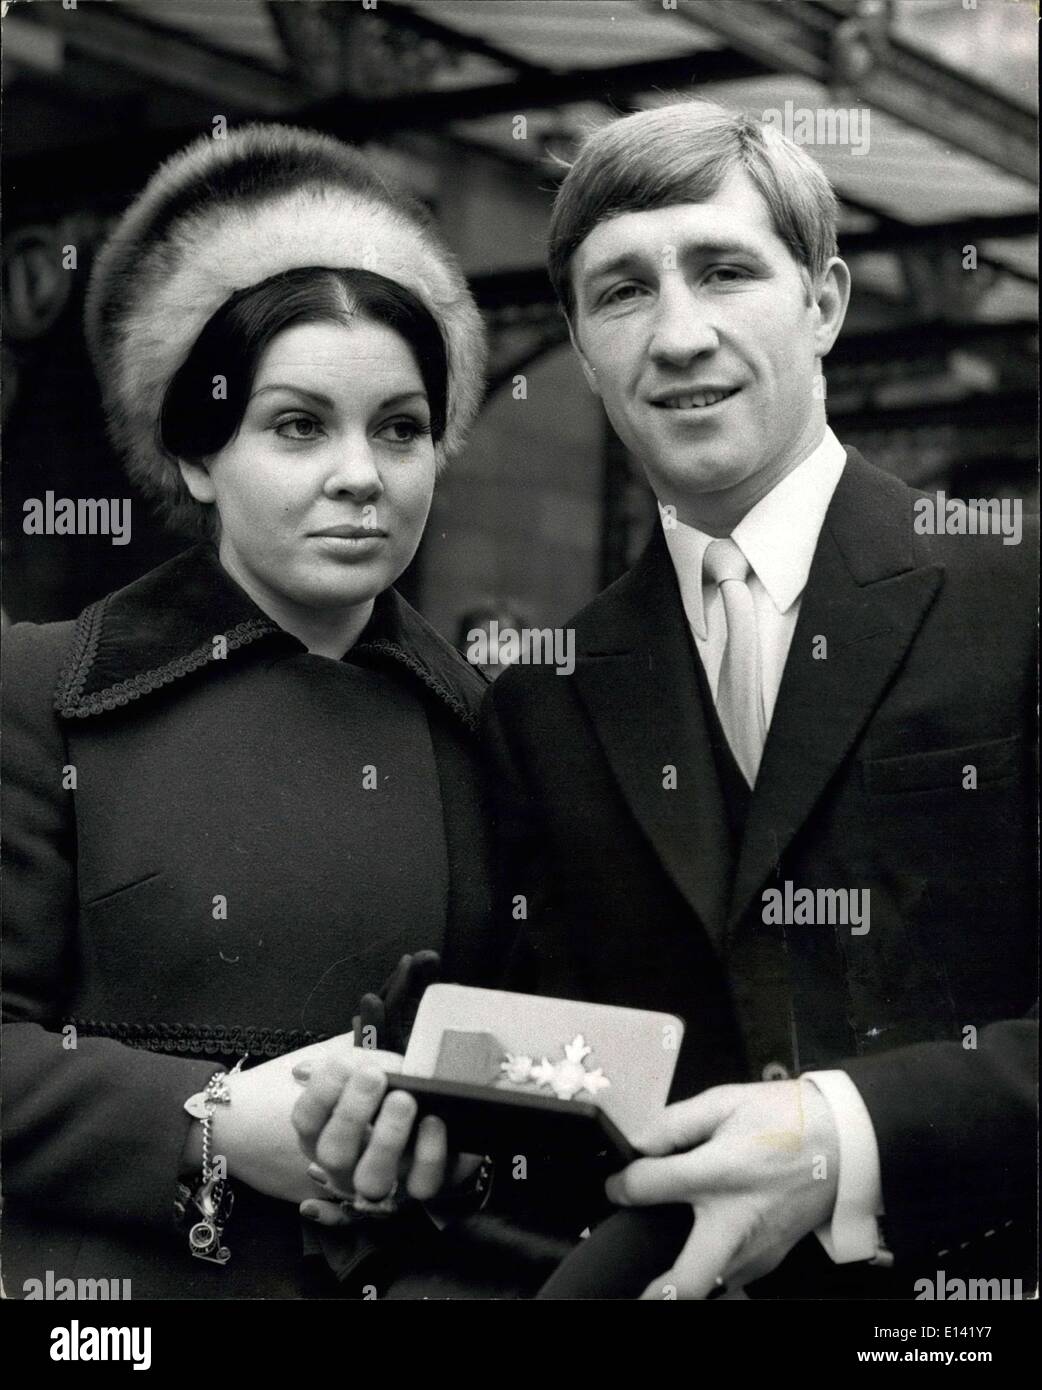 Mar. 31, 2012 - Britain's World Lightweight Champion Gets the Order of the British Empire.: Ken Buchanan, Britain's World Lightweight champion, today received the O.B.E. from Queen Elizabeth, the Queen Mother, during today's Investiture at Buckingham Palace. Photo shows Ken Buchanan pictured with his wife Carol with his O.B.E. outside the Palace today. Stock Photo